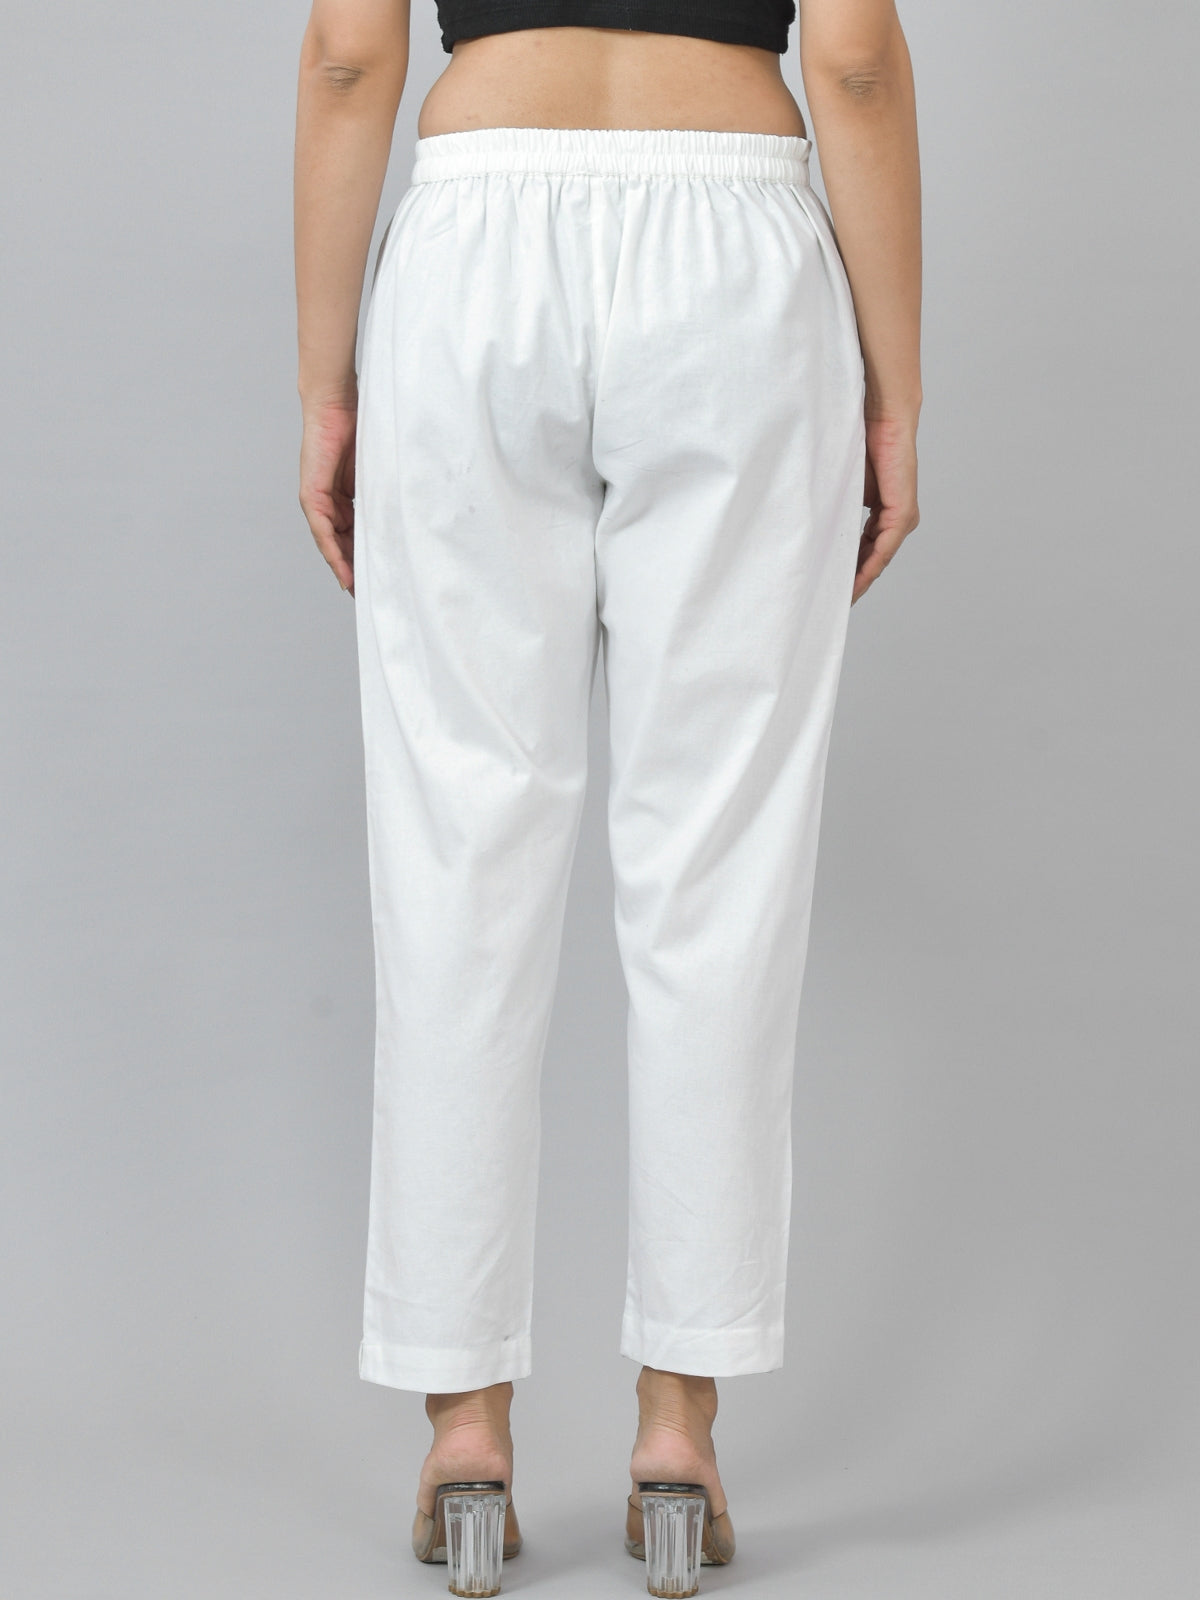 Women's White Summer Cotton Trousers PANTS For Girls White Cotton Straight  Fit Women's Cigarette Pants Trousers